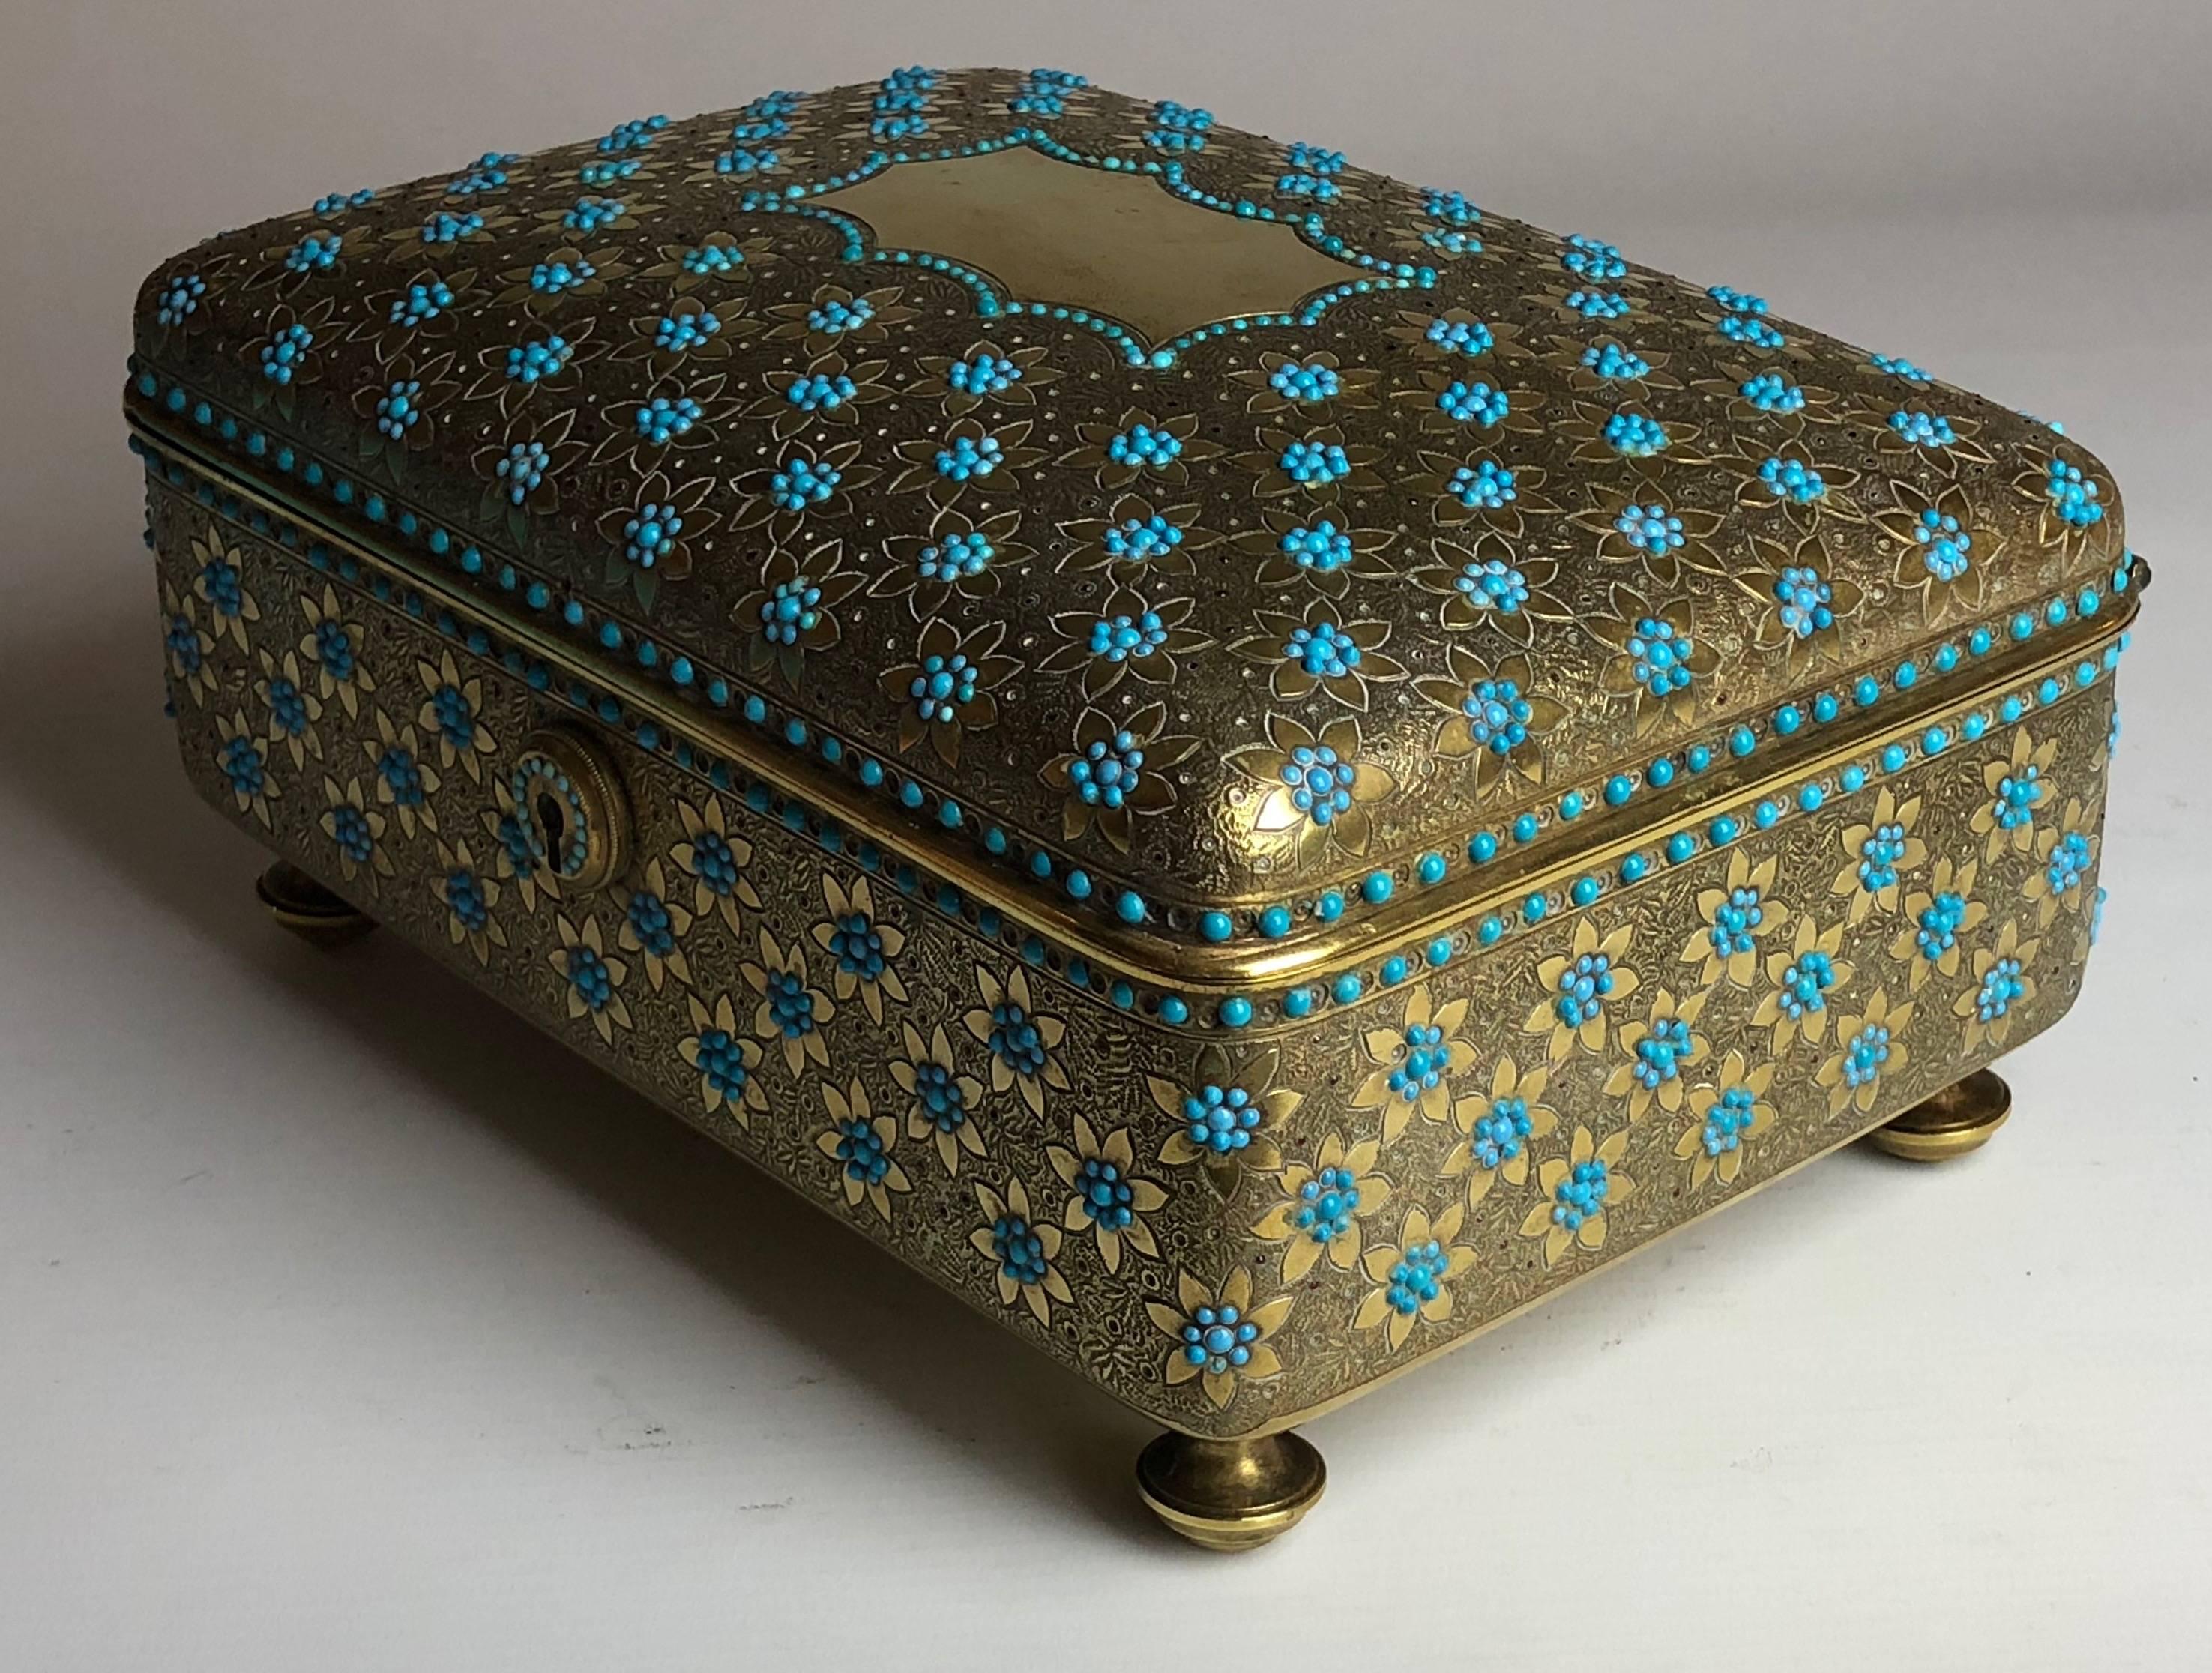 An excellent quality box inlaid all over with turquoise flowers.

French, circa 1880

The box measures 9